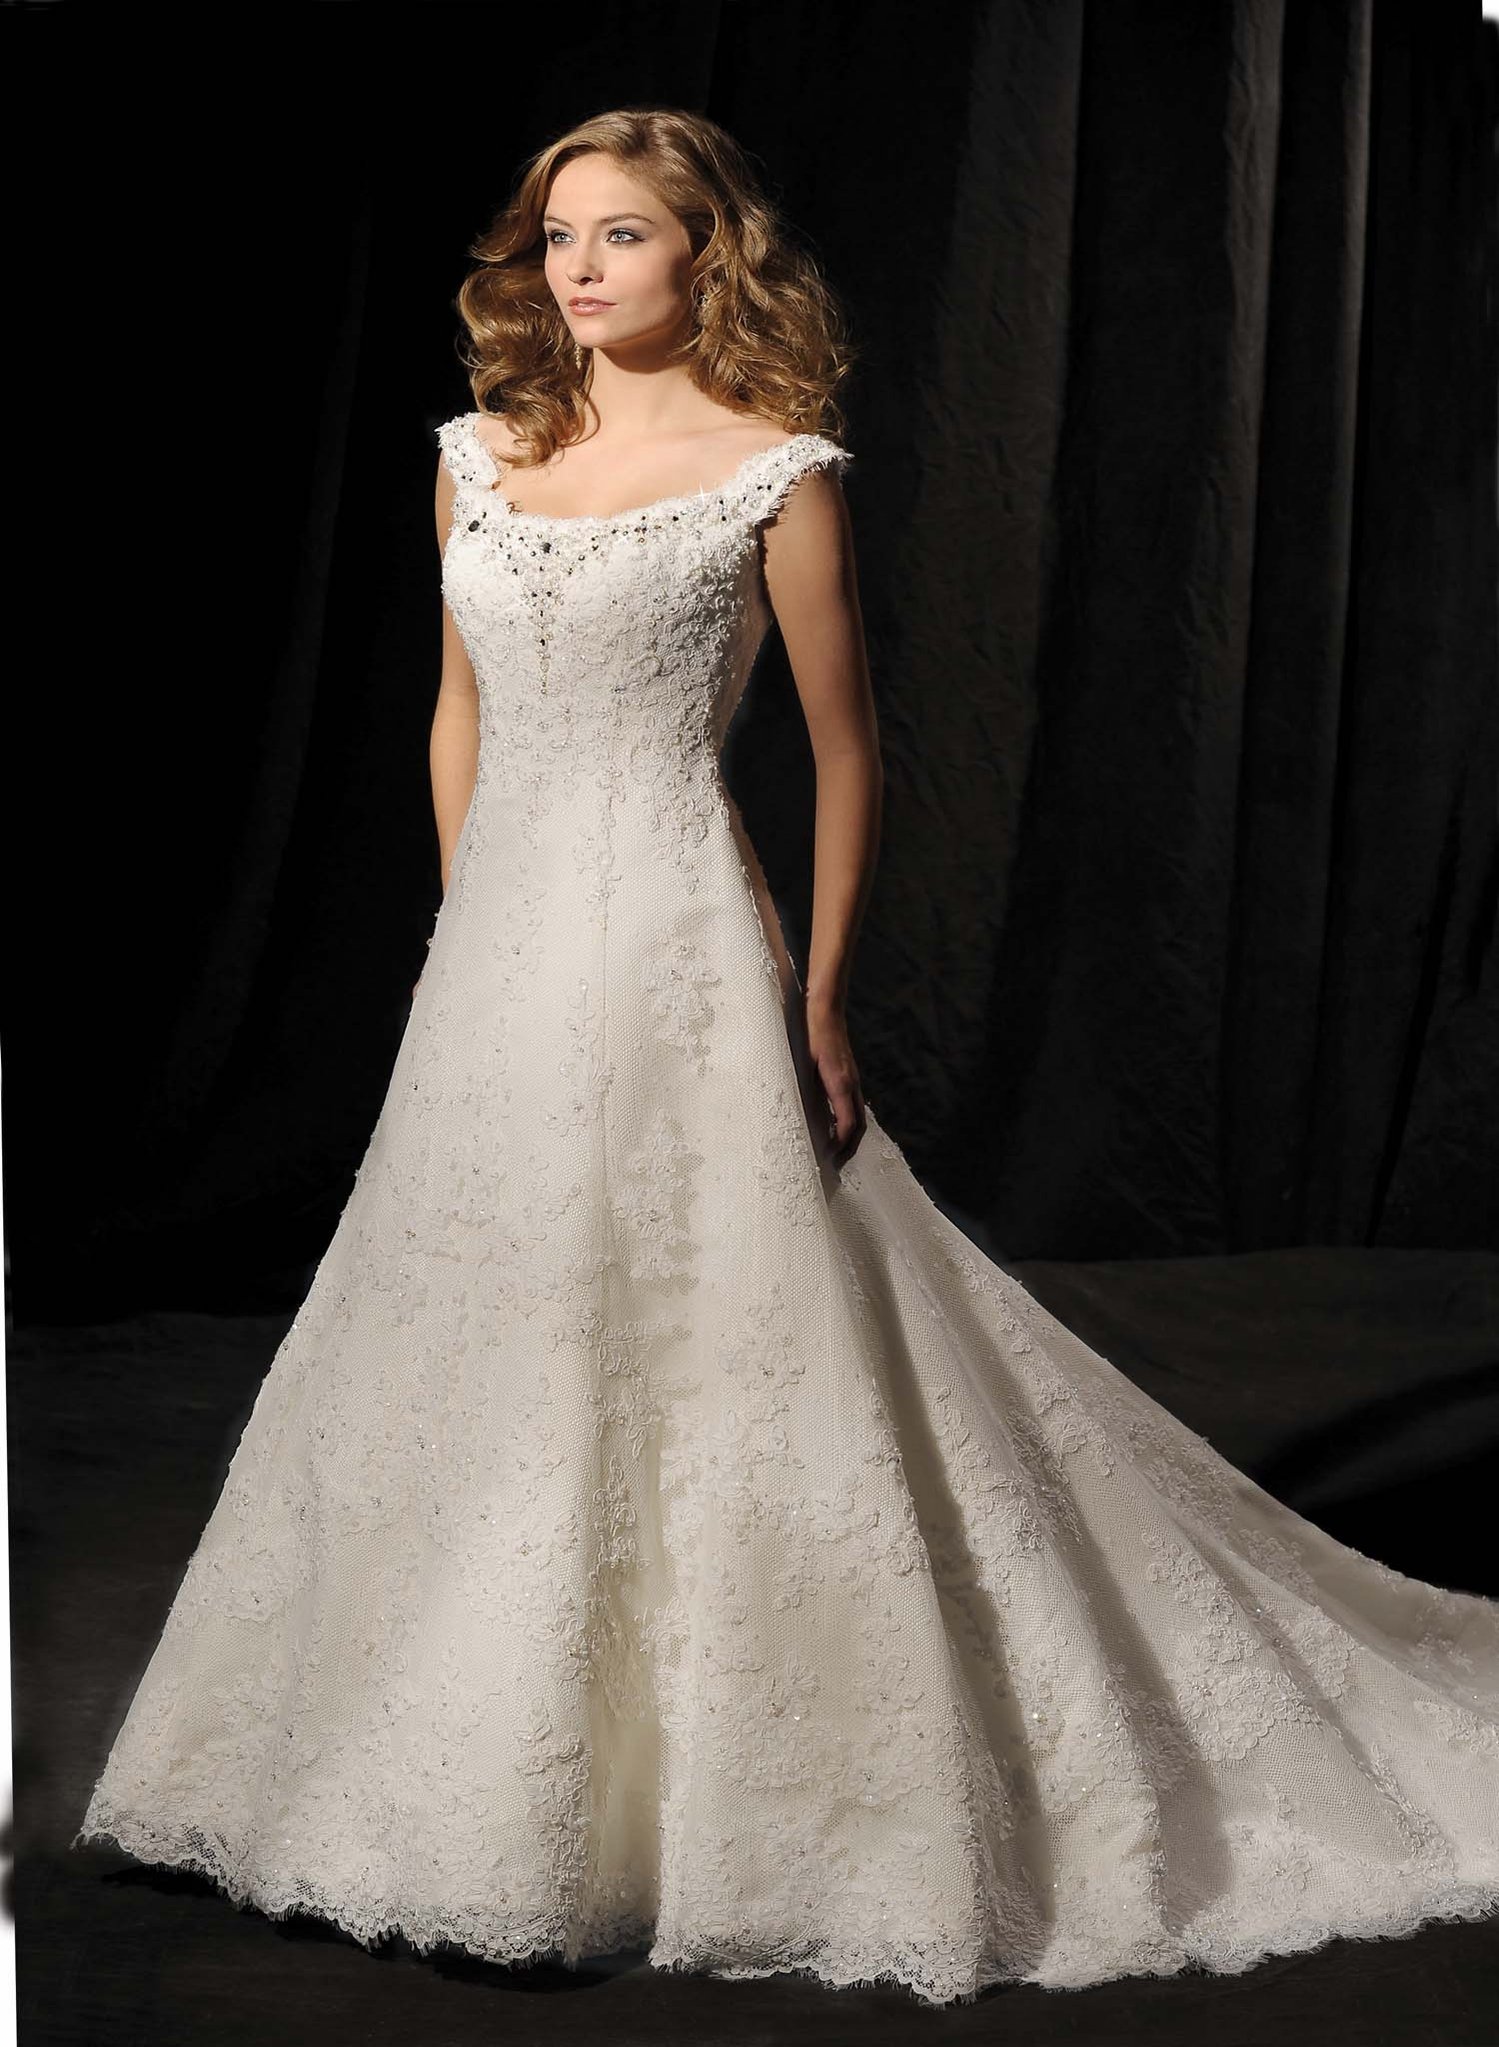 All Lace Wedding Dress Styles